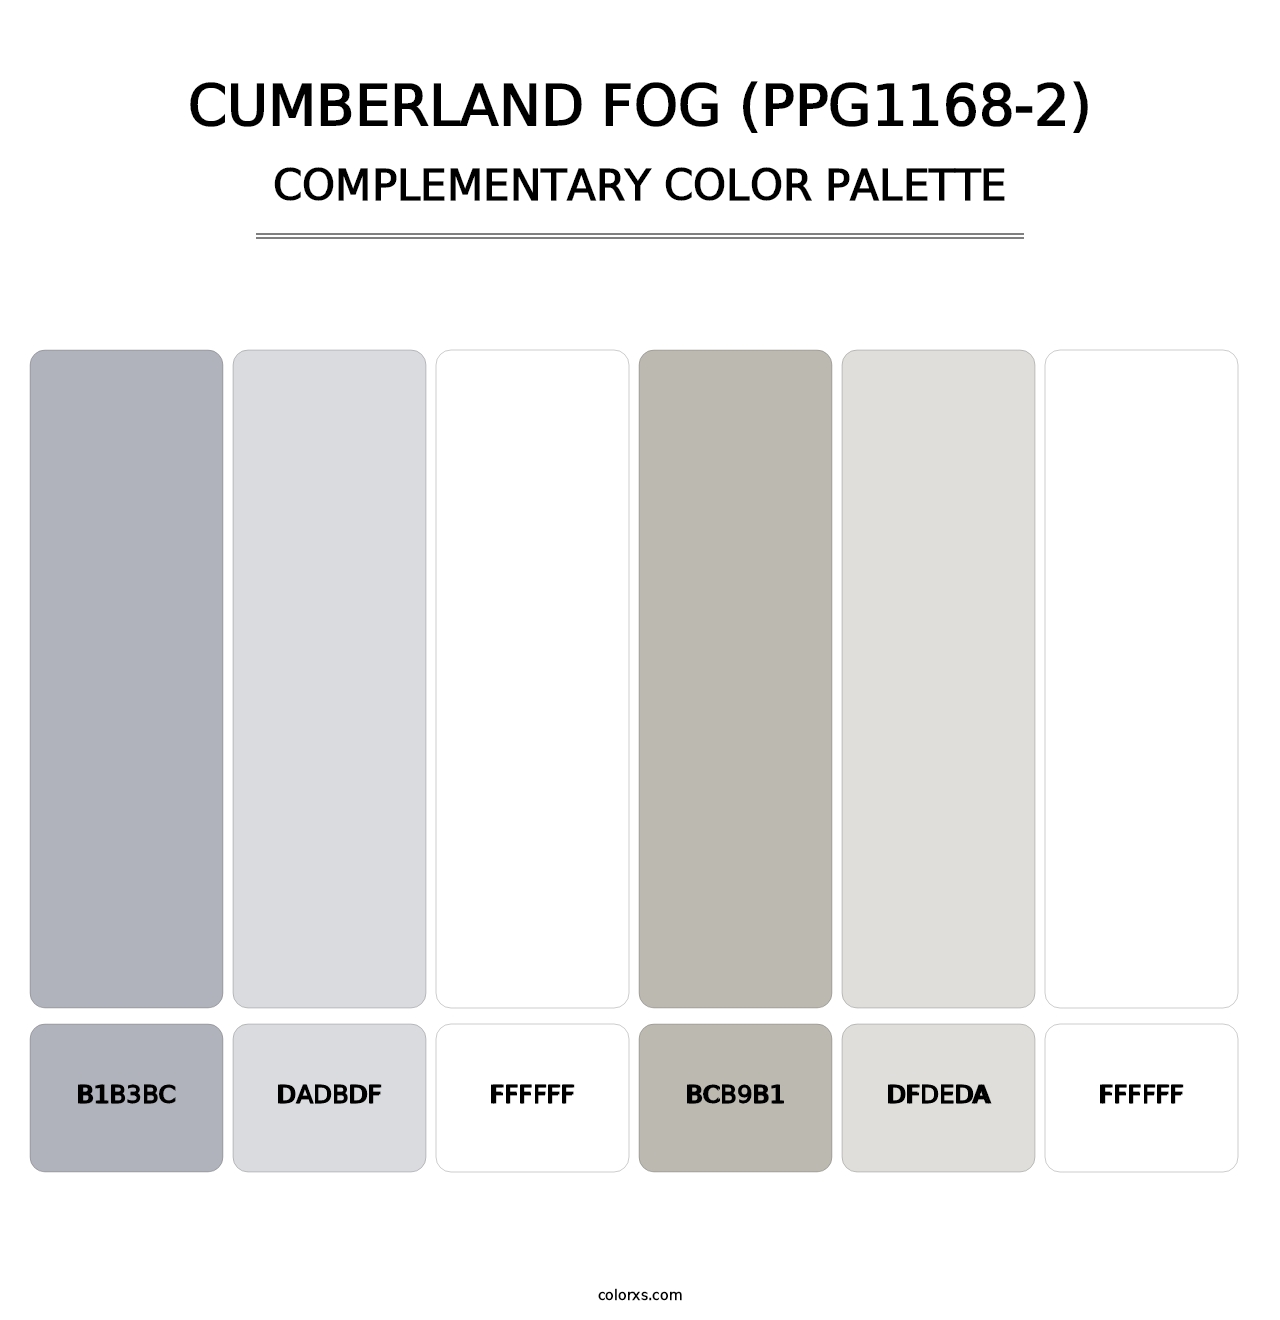 Cumberland Fog (PPG1168-2) - Complementary Color Palette